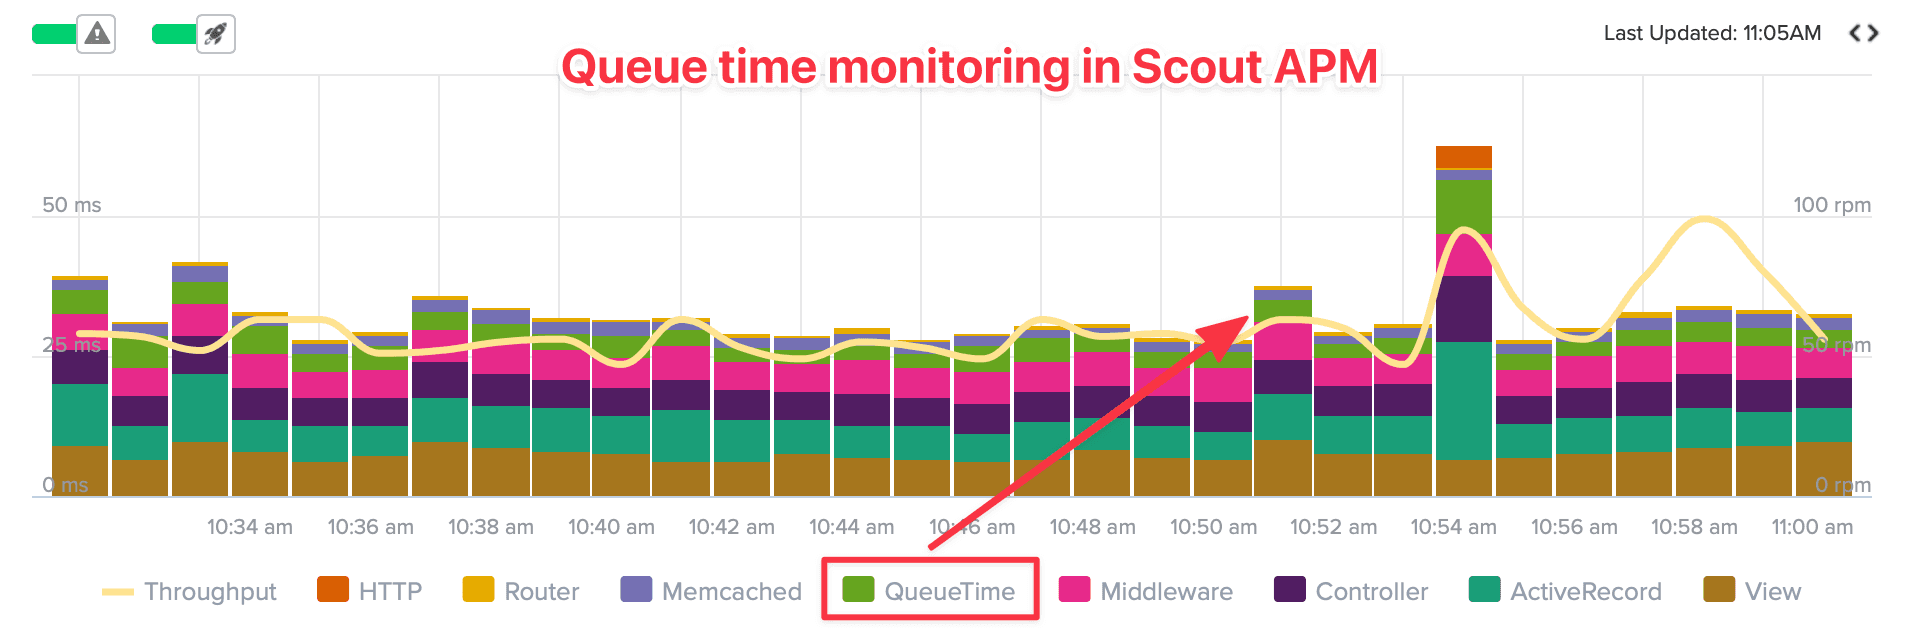 Screenshot of queue time monitoring in Scout APM